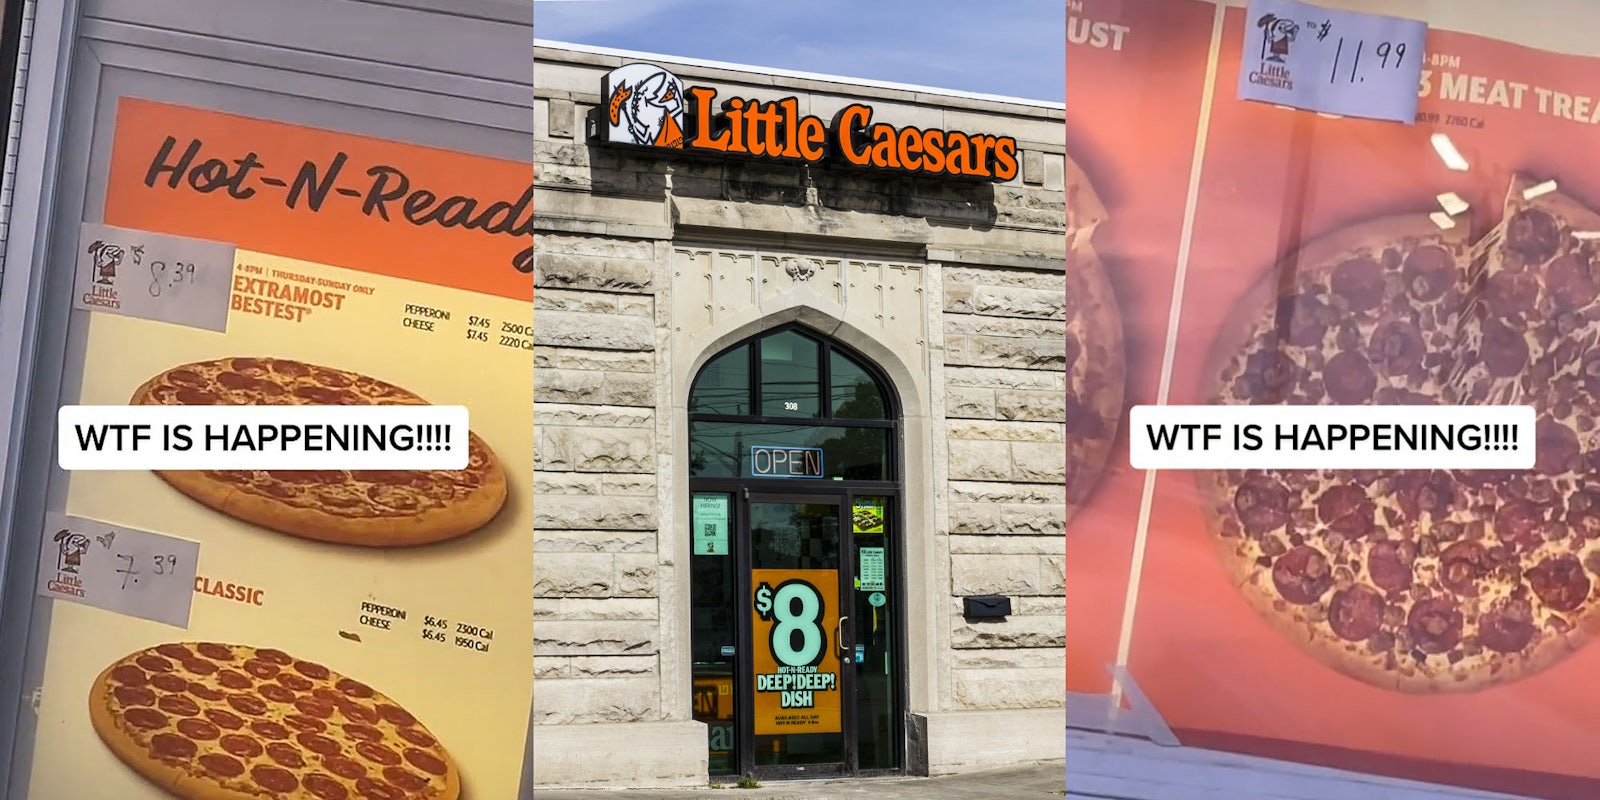 Little Caesars drive thru menu with paper price changes caption 'WTF IS HAPPENING!!!!' (l) Little Caesars building with sign (c) Little Caesars drive thru menu with paper price changes caption 'WTF IS HAPPENING!!!!' (r)